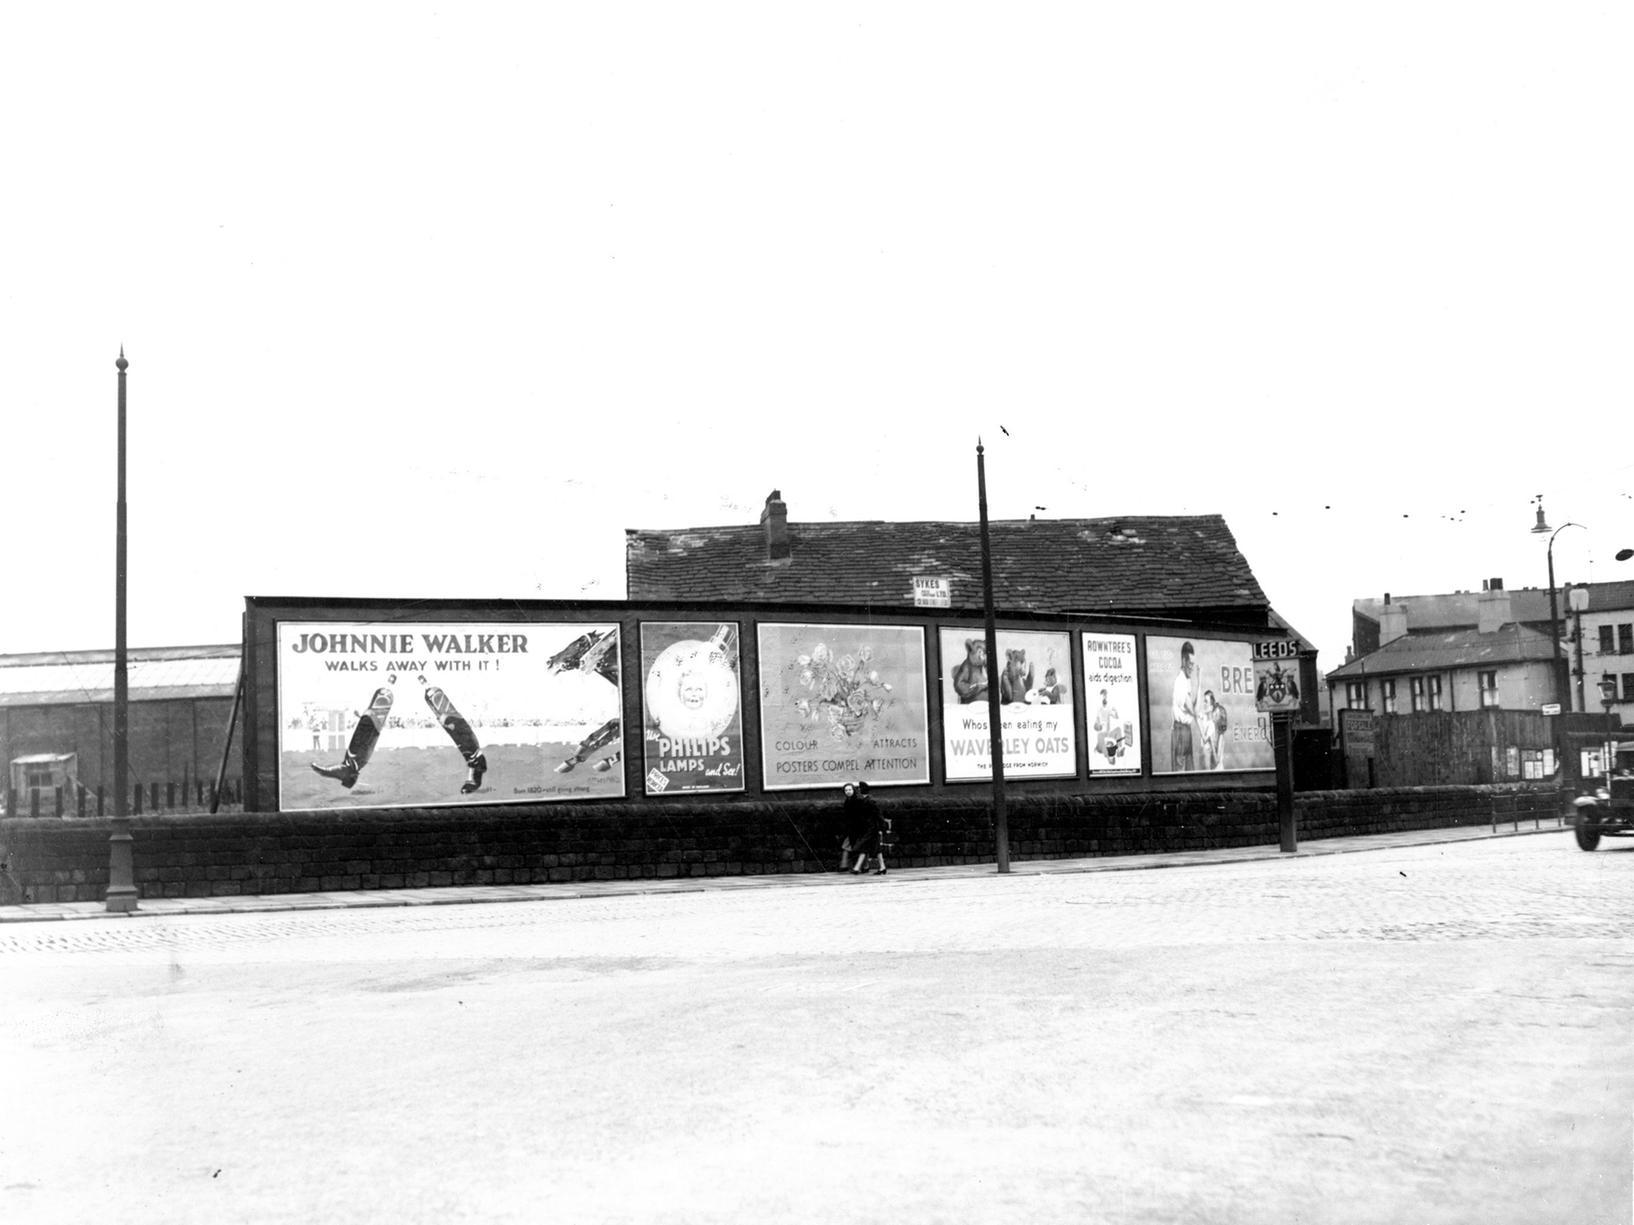 A view of advertising signs on Wakefield Road at Thwaite gate in Stourton.